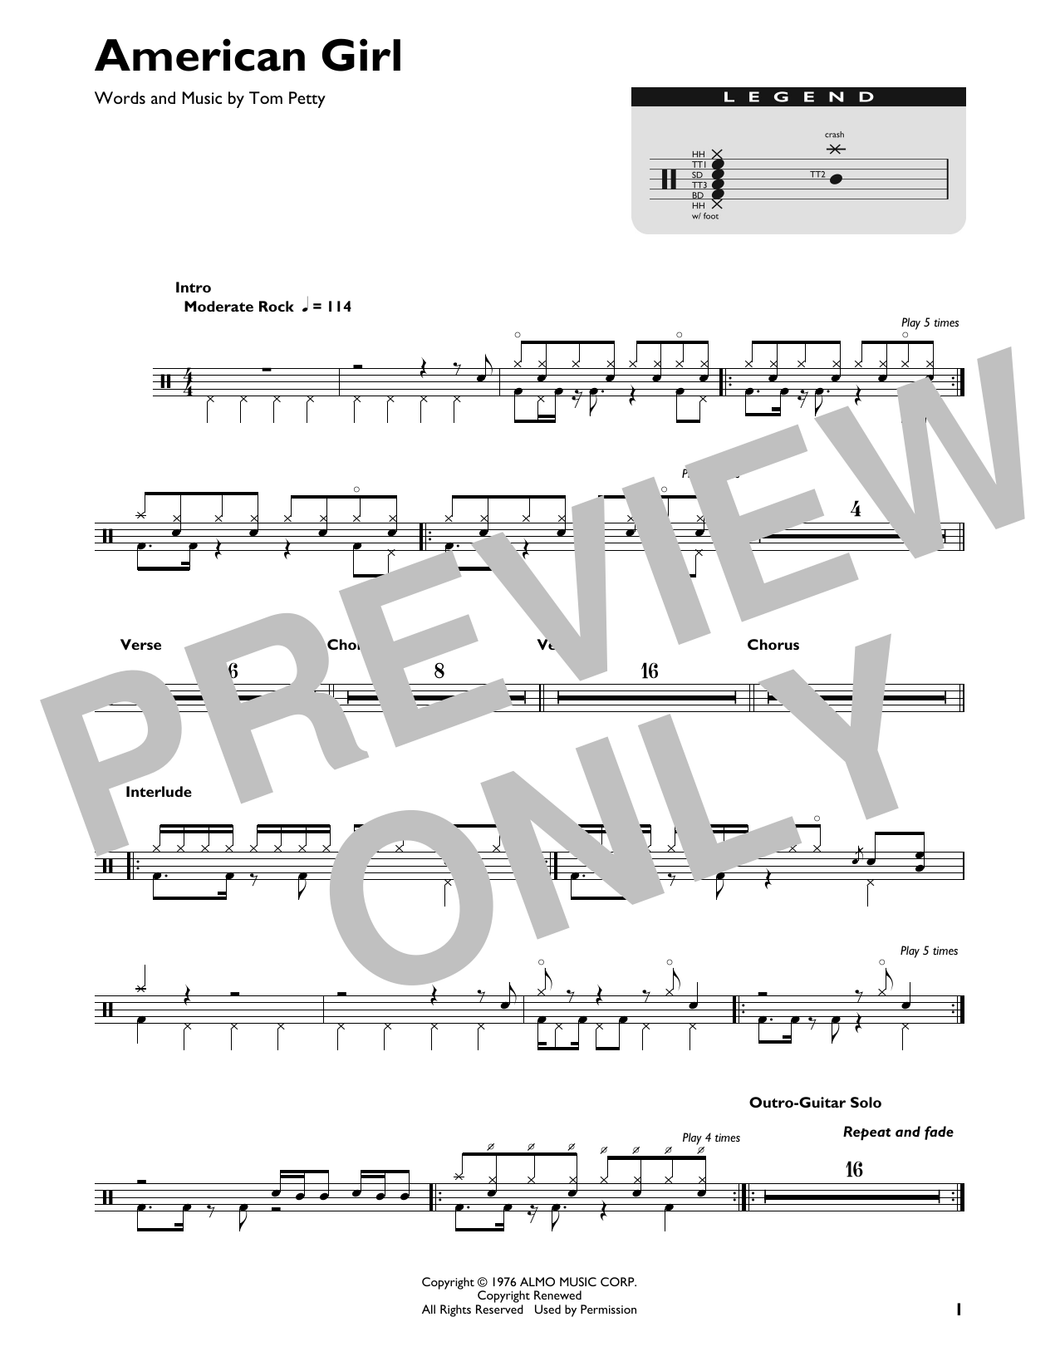 American Girl - Tom Petty and the Heartbreakers - Full Drum Transcription / Drum Sheet Music - SheetMusicDirect DT